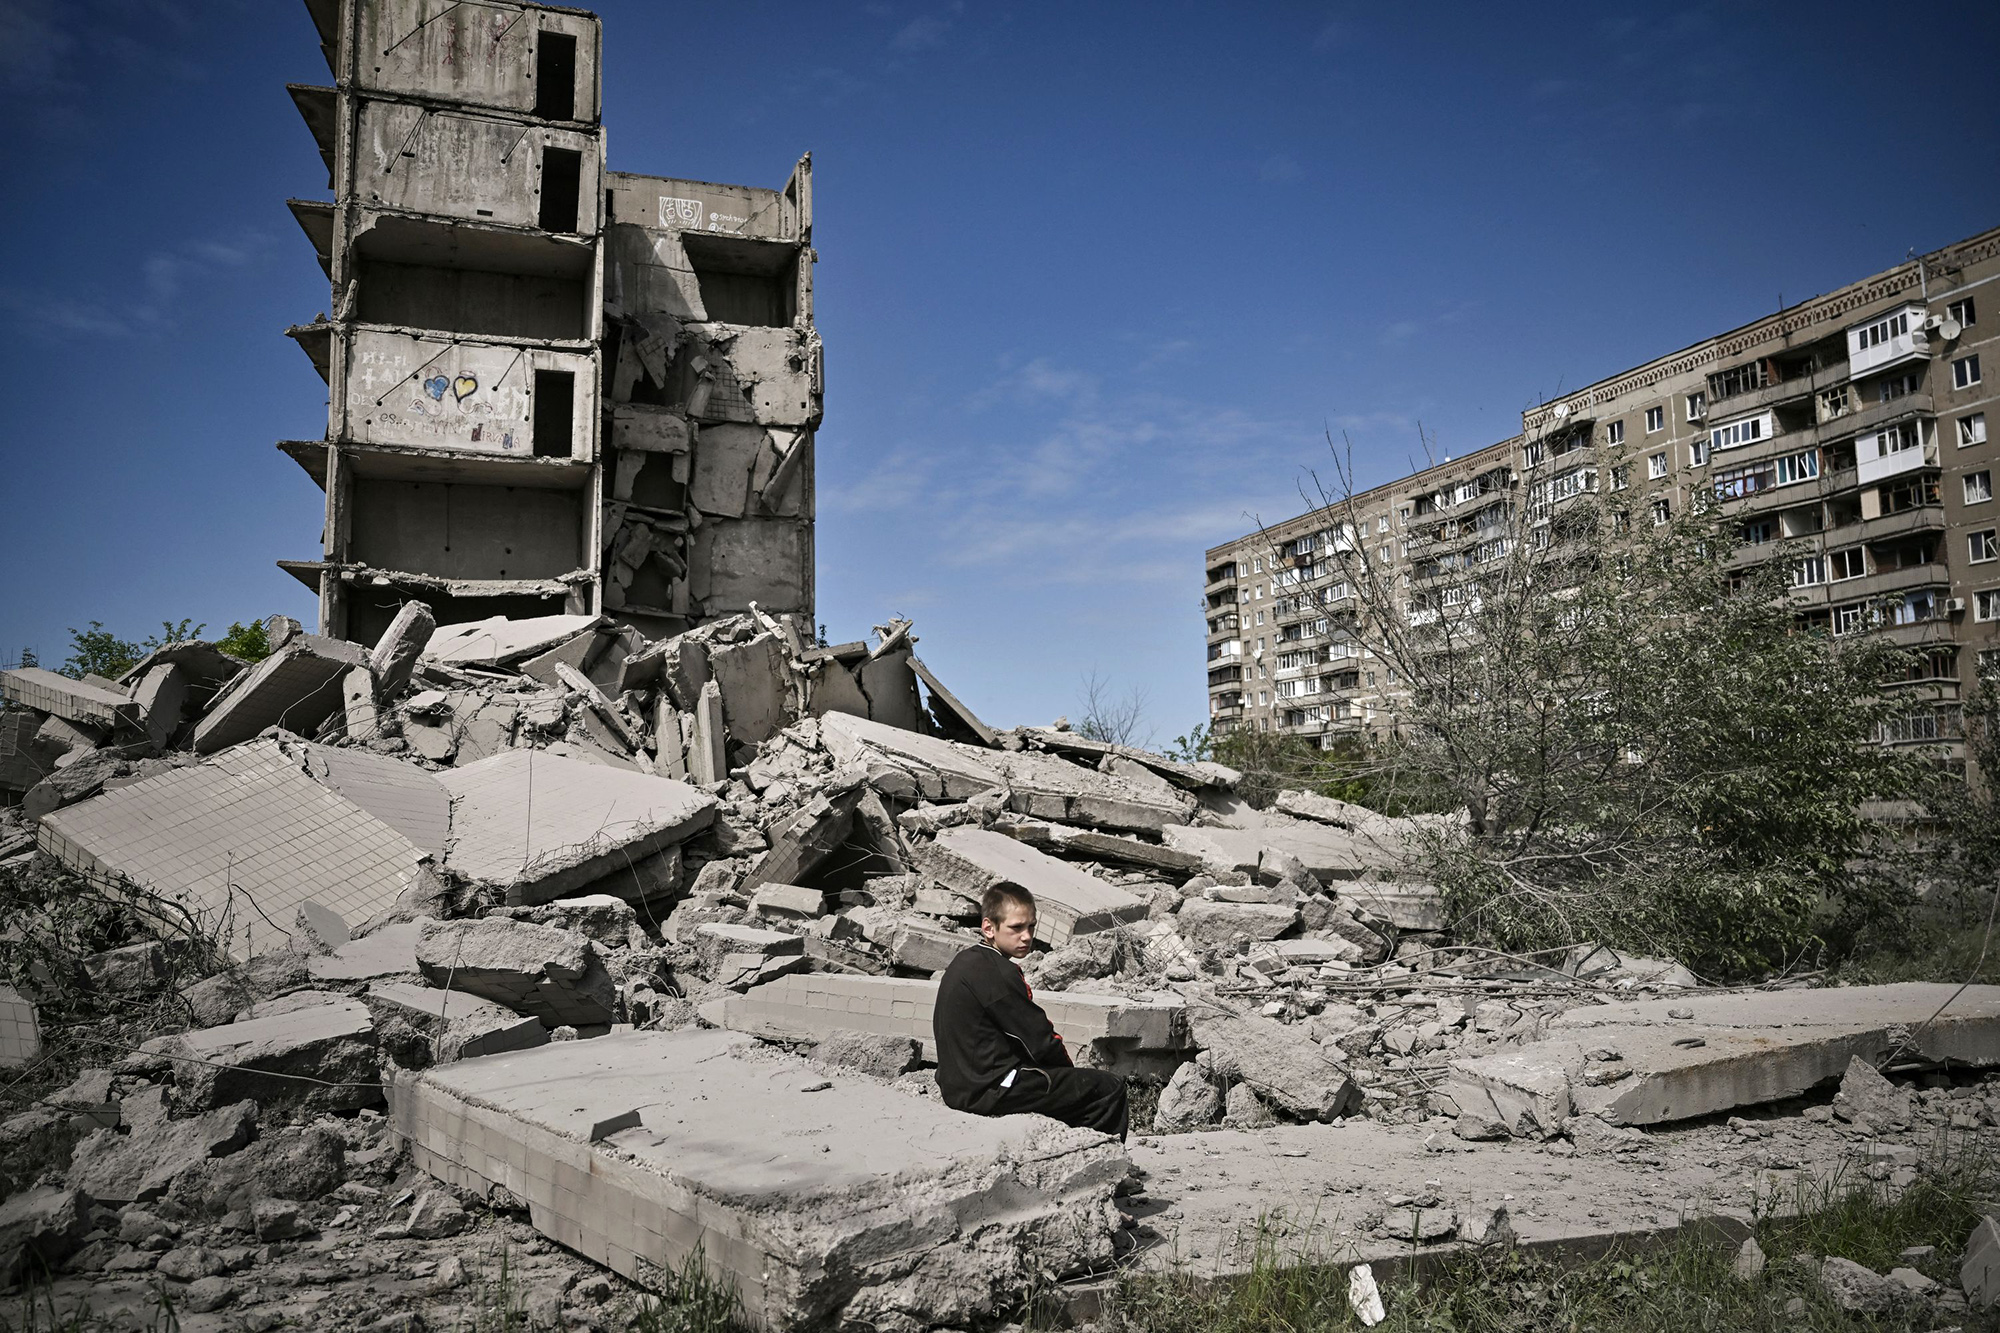 A boy sits in front of a damaged building after a strike in Kramatorsk, in the eastern Ukrainian region of Donbas, on May 25.&nbsp;